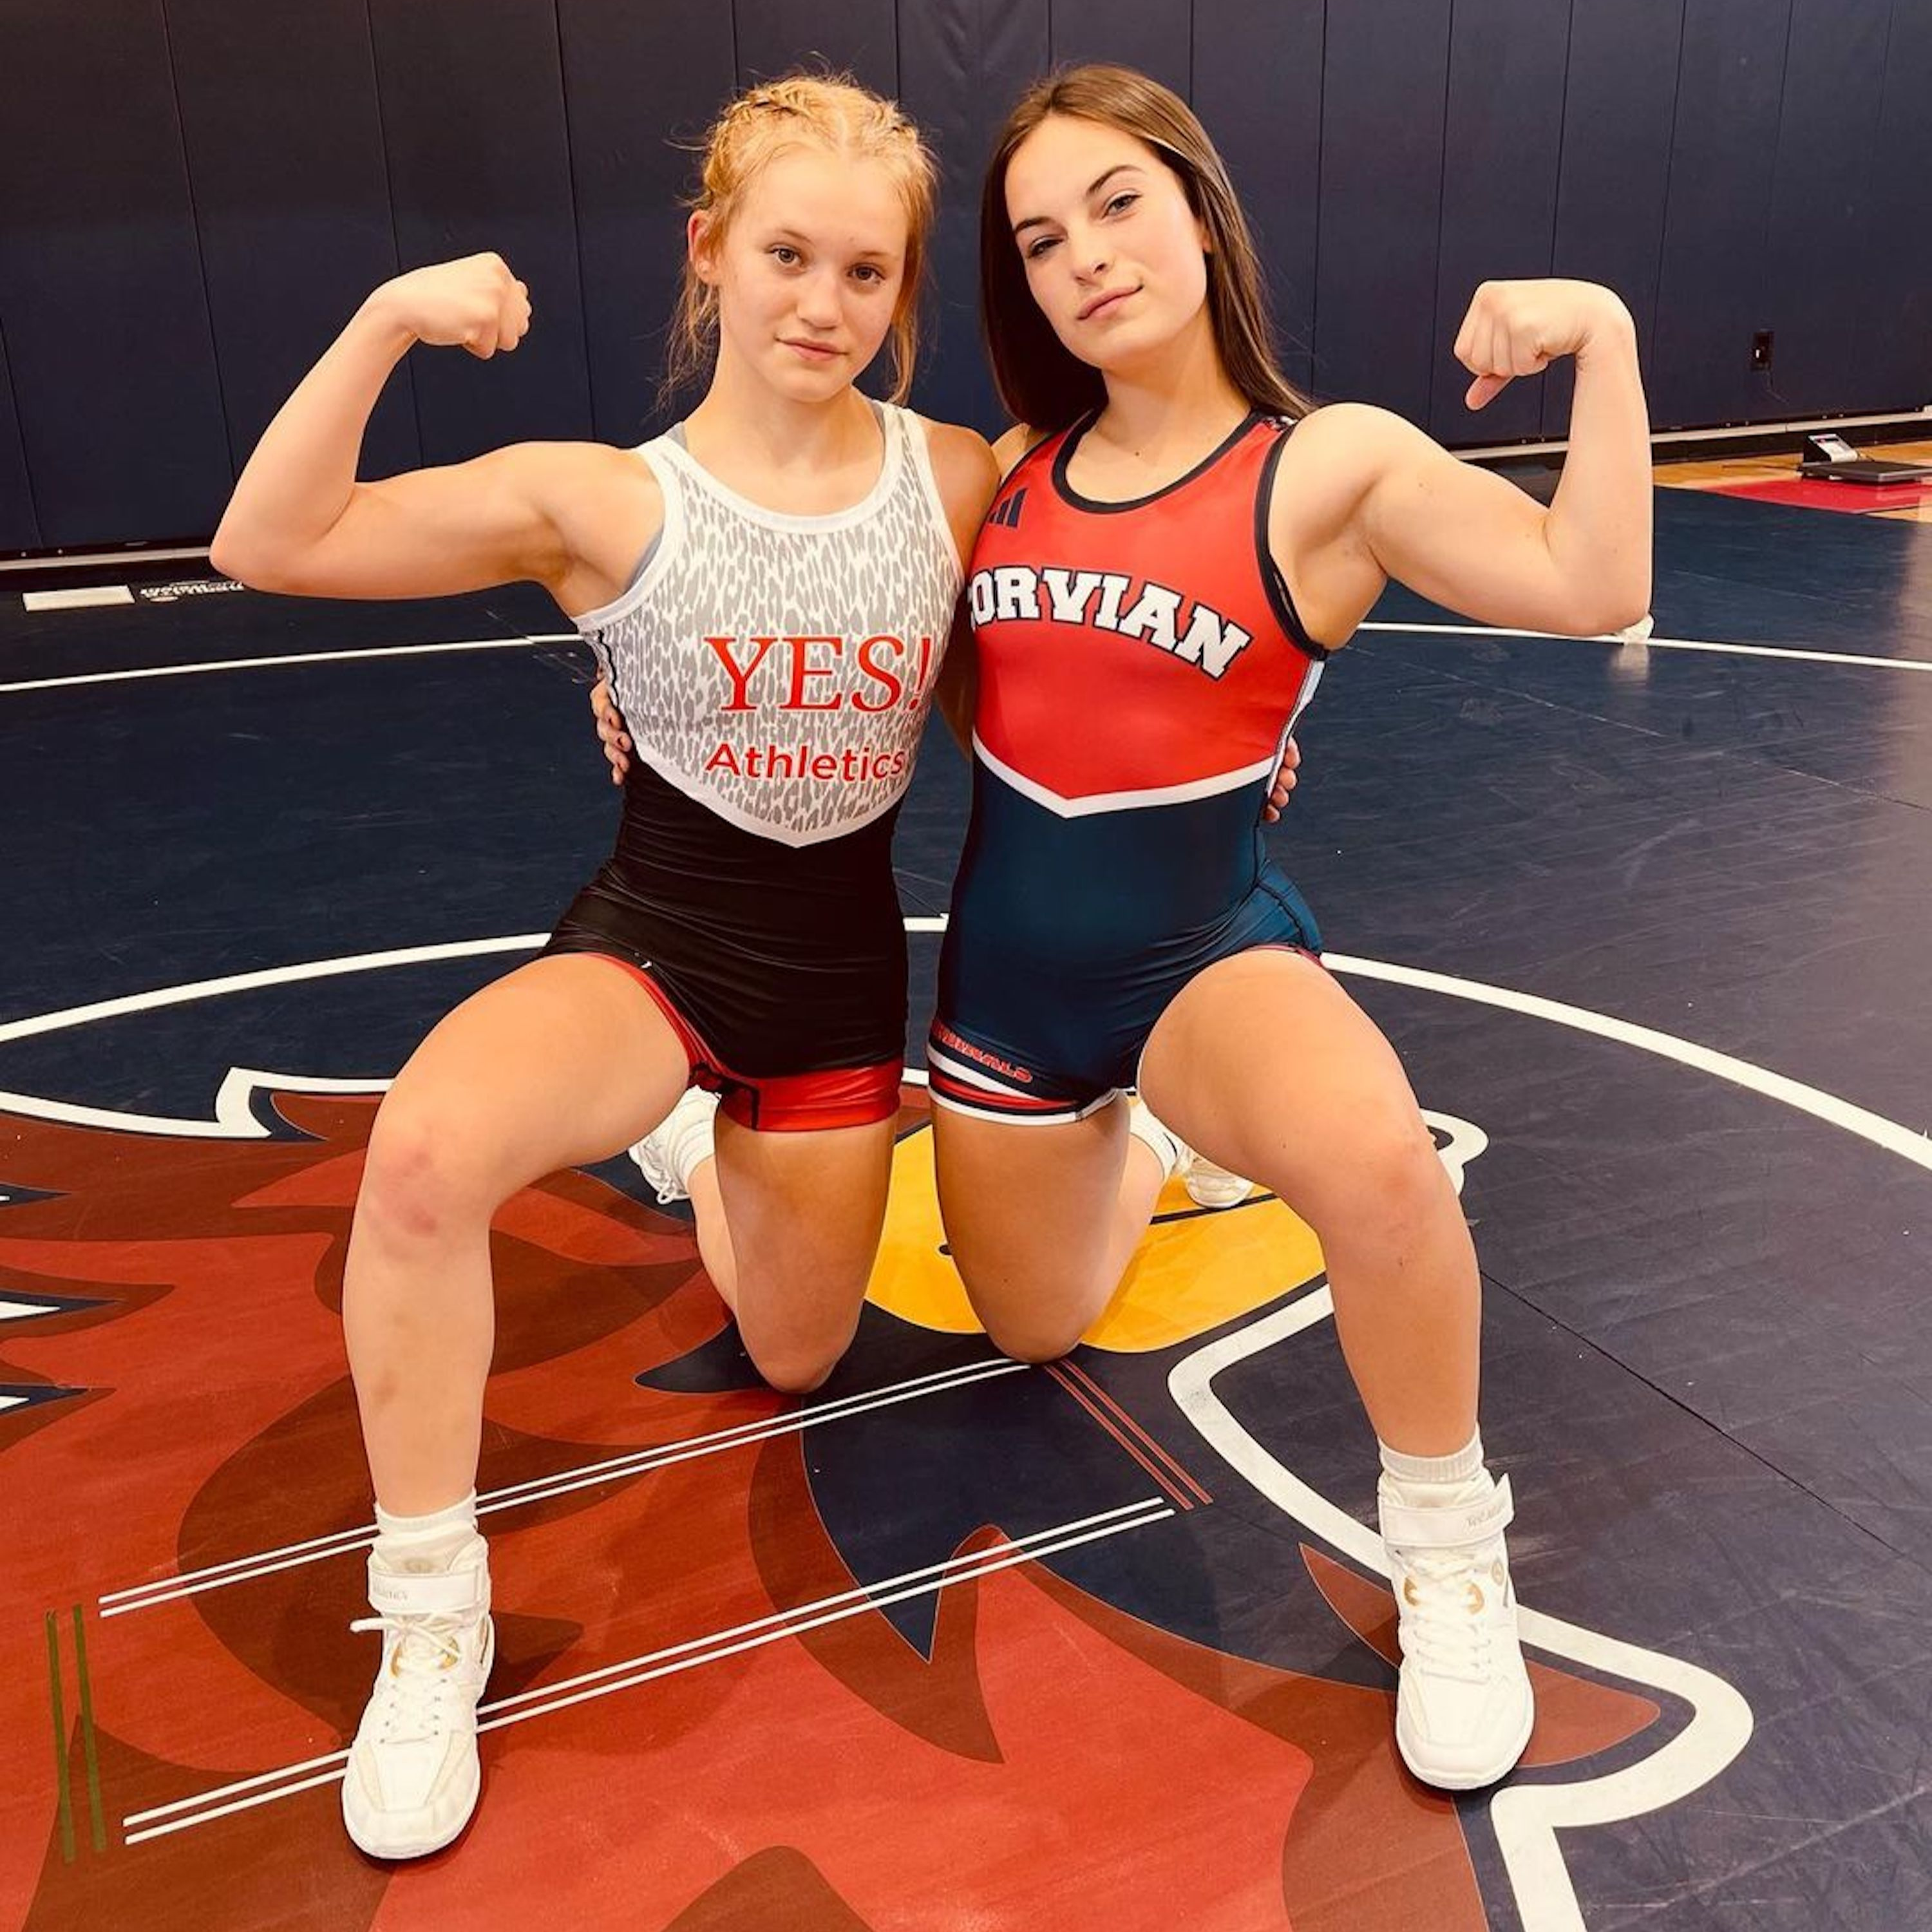 Girl athletes in wrestling gear flexing muscles